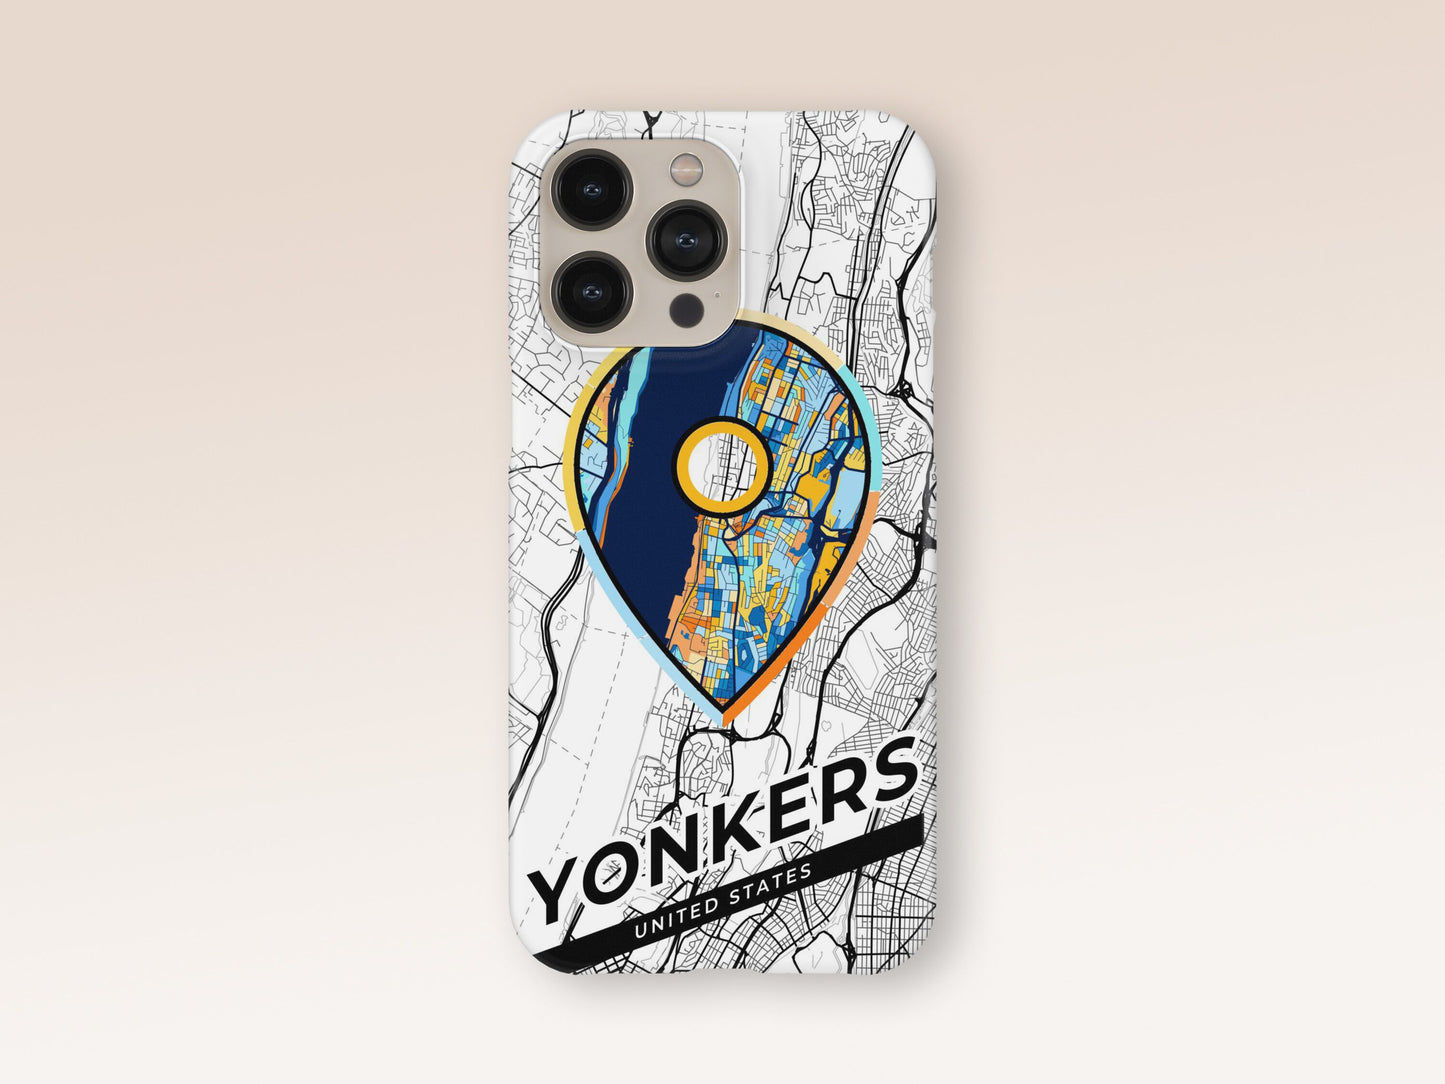 Yonkers New York slim phone case with colorful icon 1